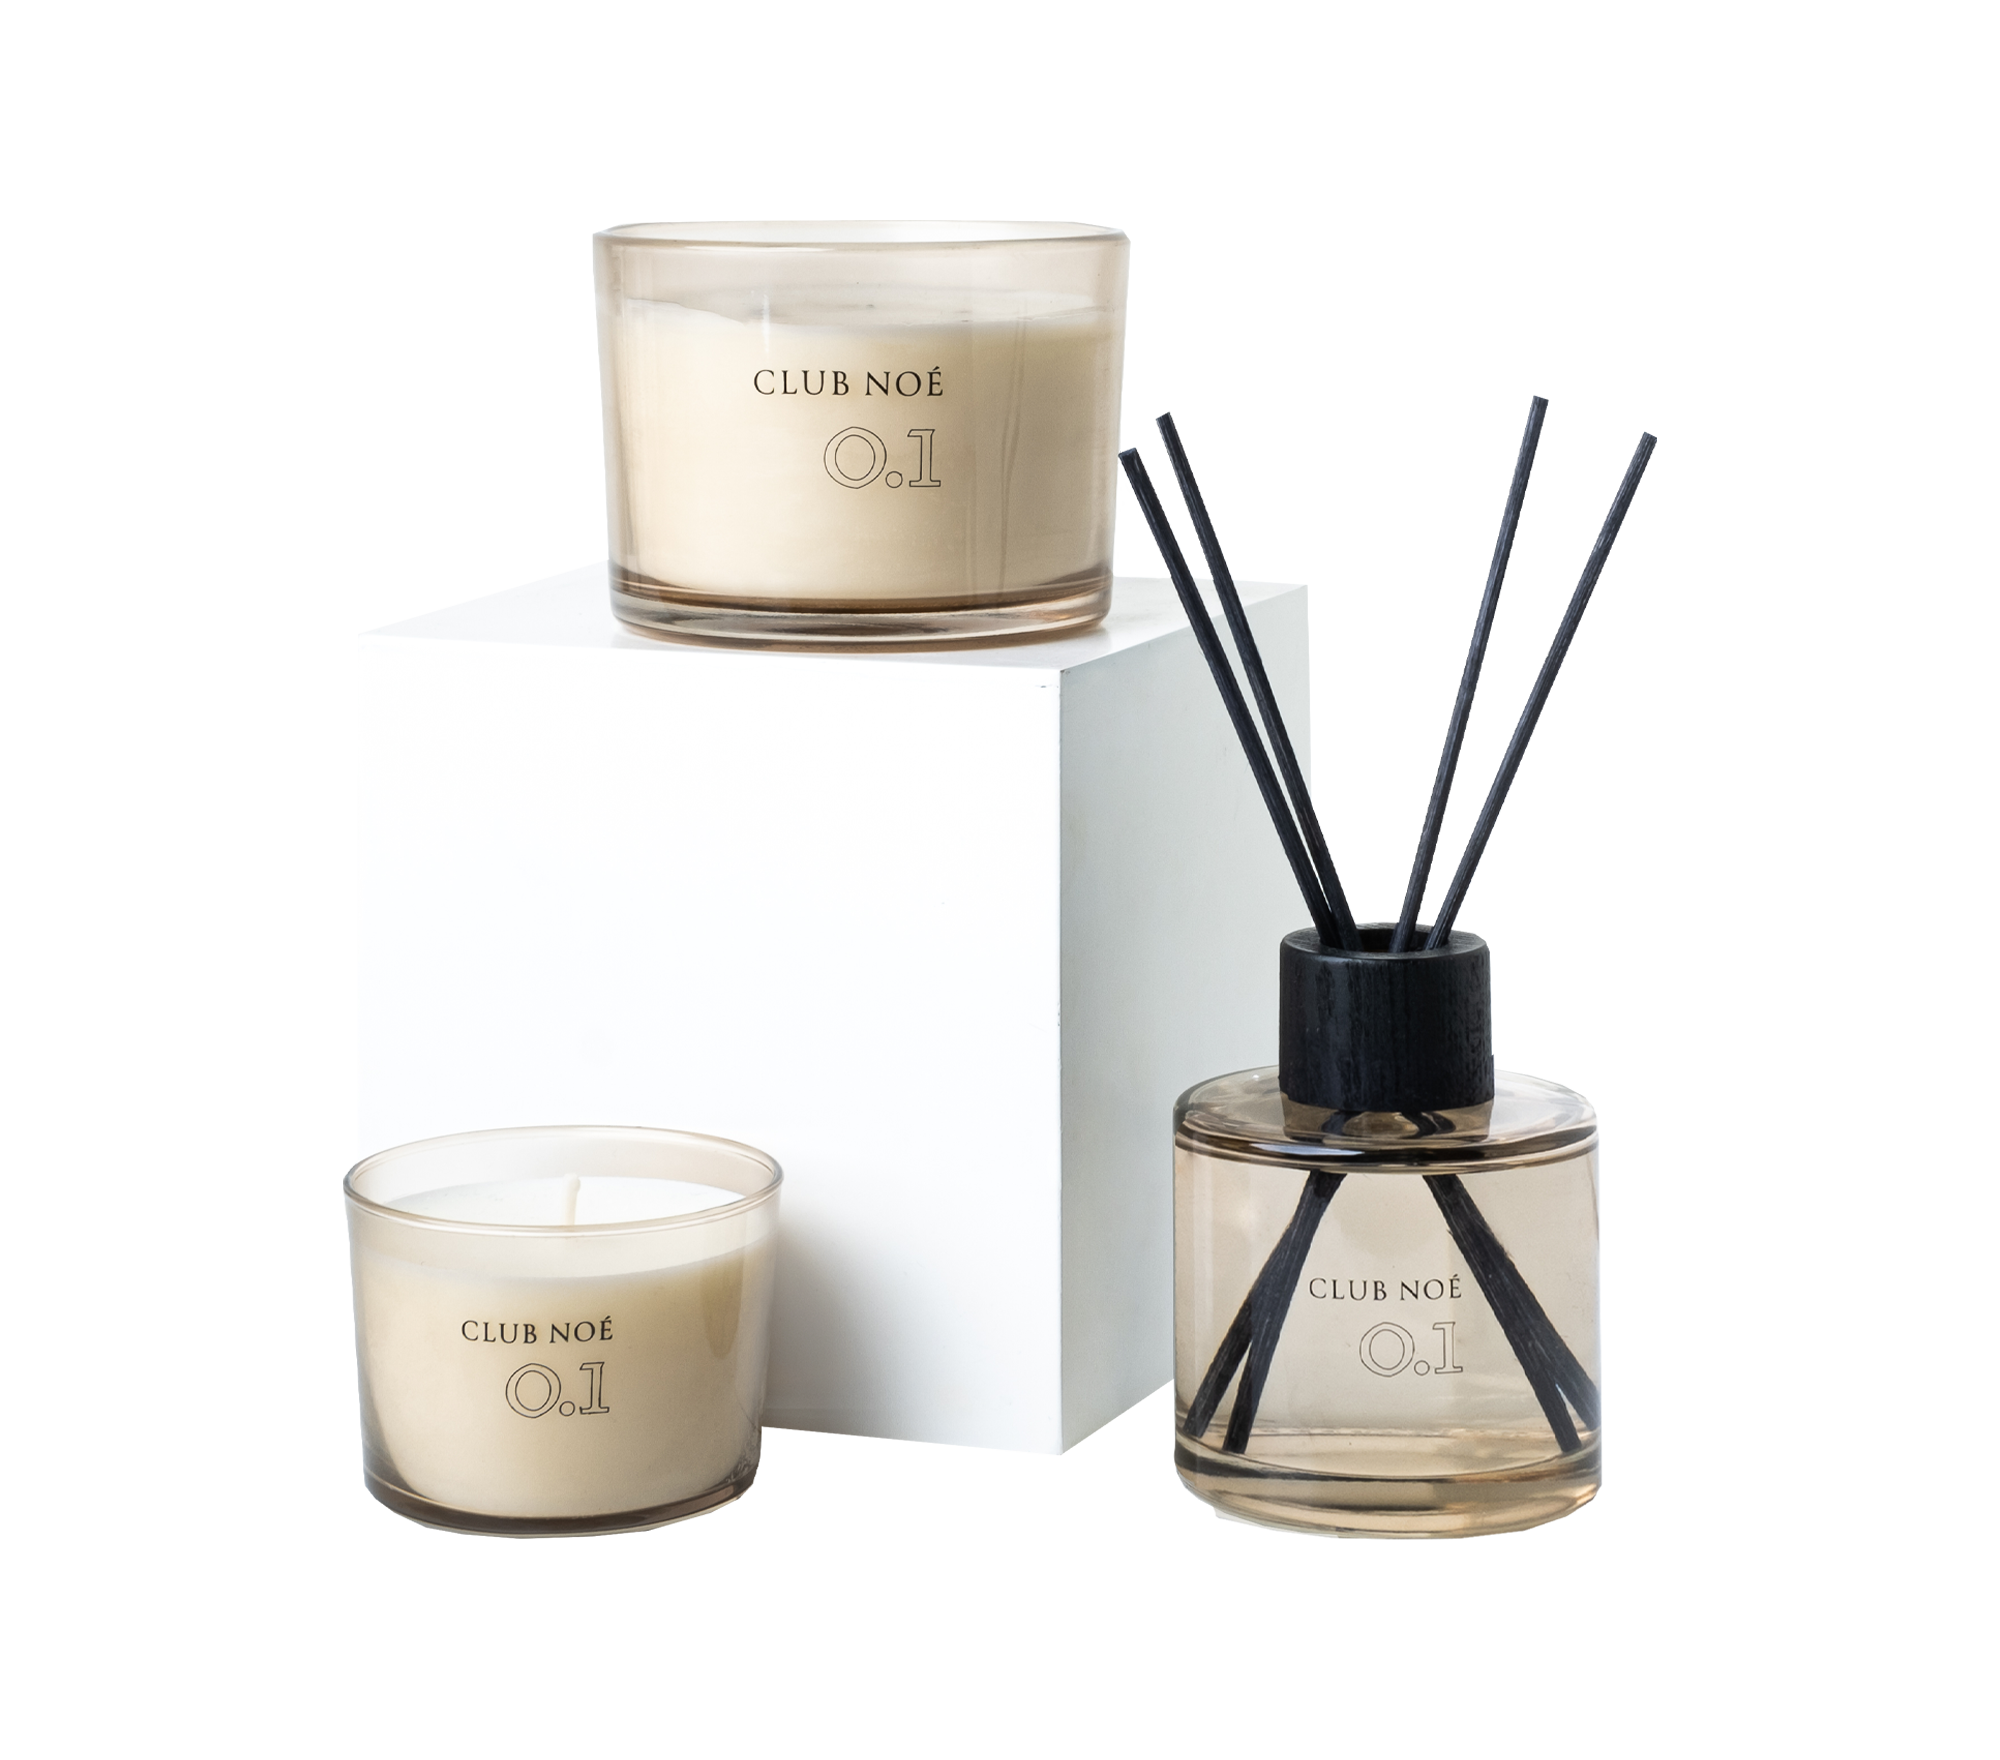 0.1 Home Fragrance Collection